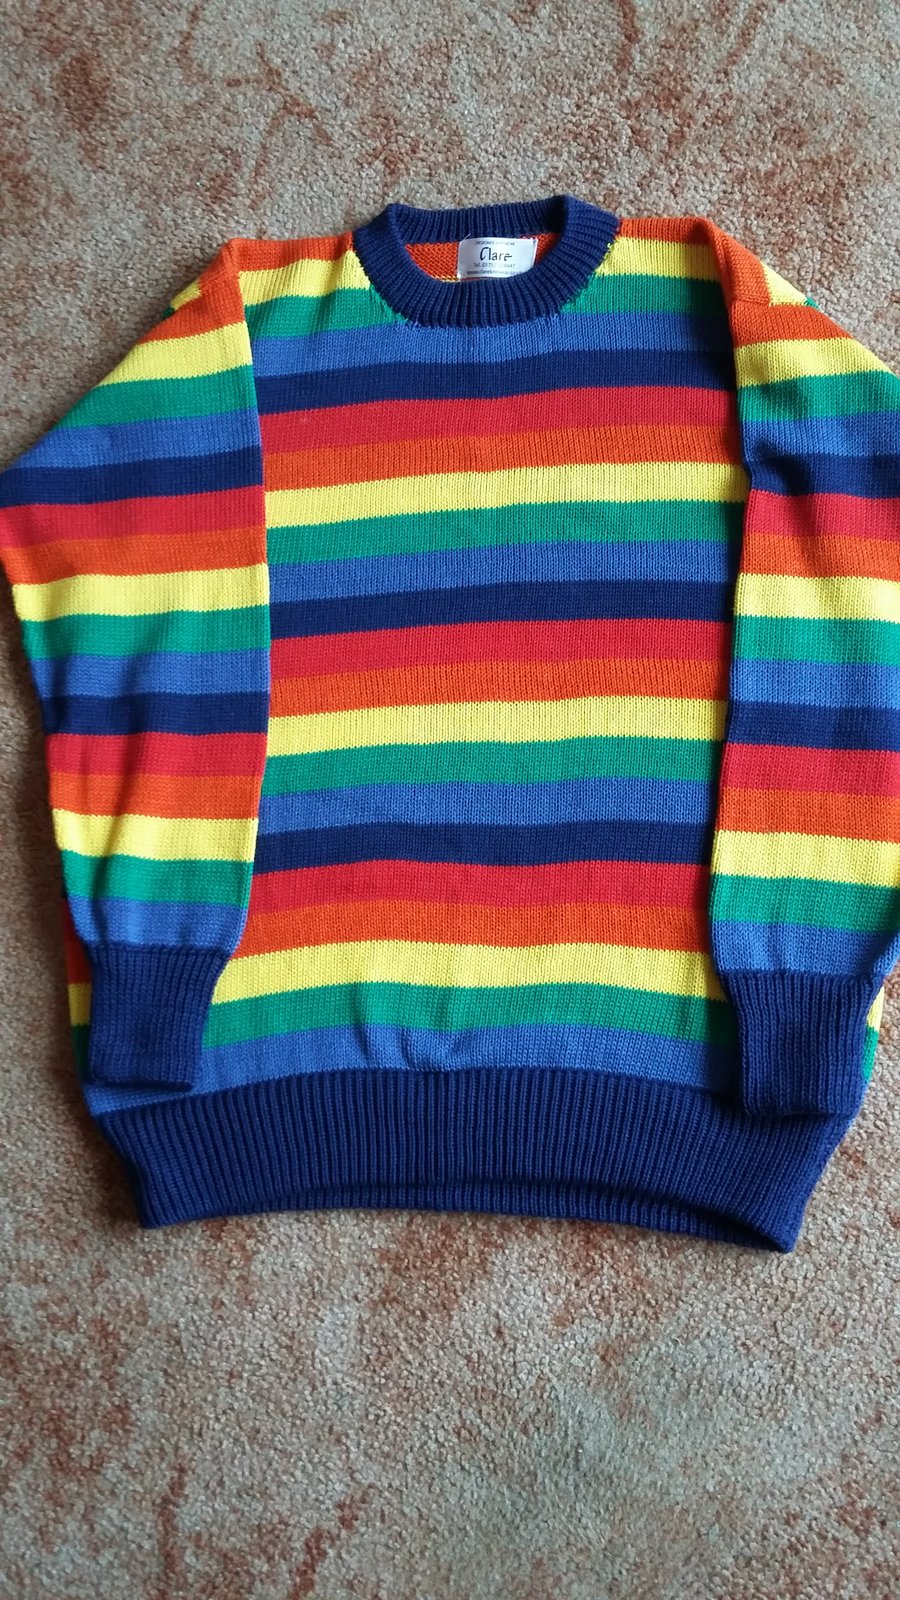 Rainbow jumper for adults